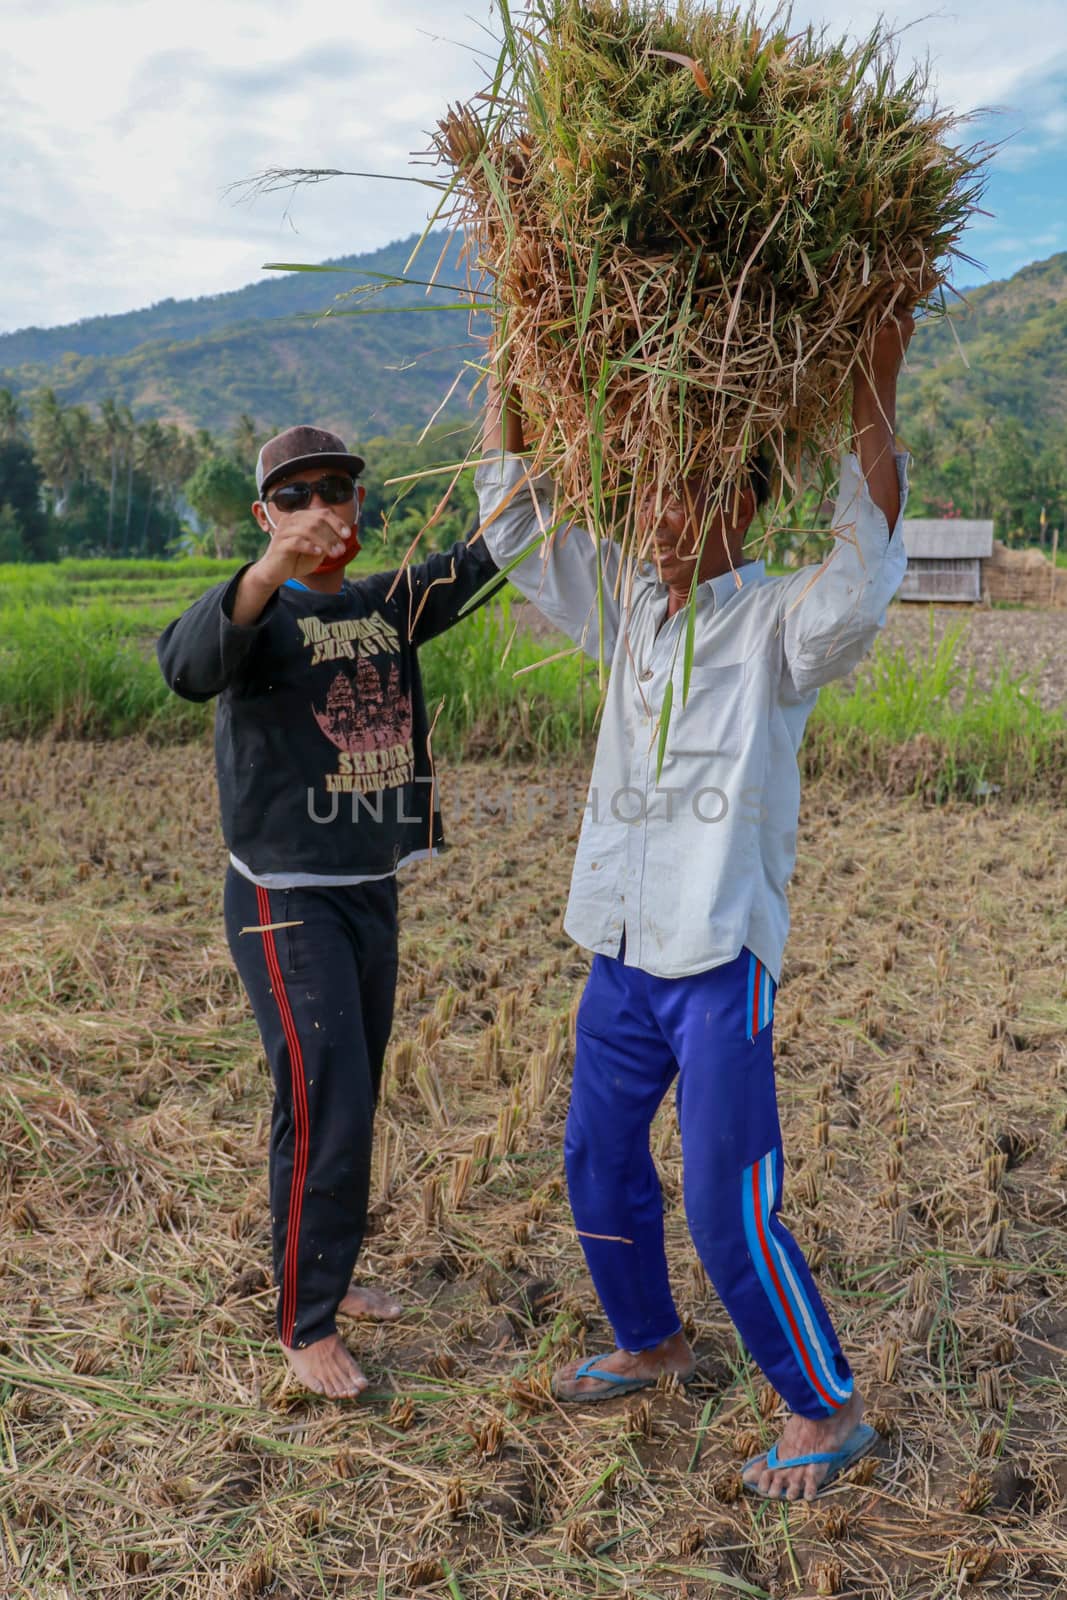 Balinese rice farmer at work harvesting ripe rice on a beautiful sunny day. Two men working in the field. A younger man helps an older one to pick up a sheaf of grass.